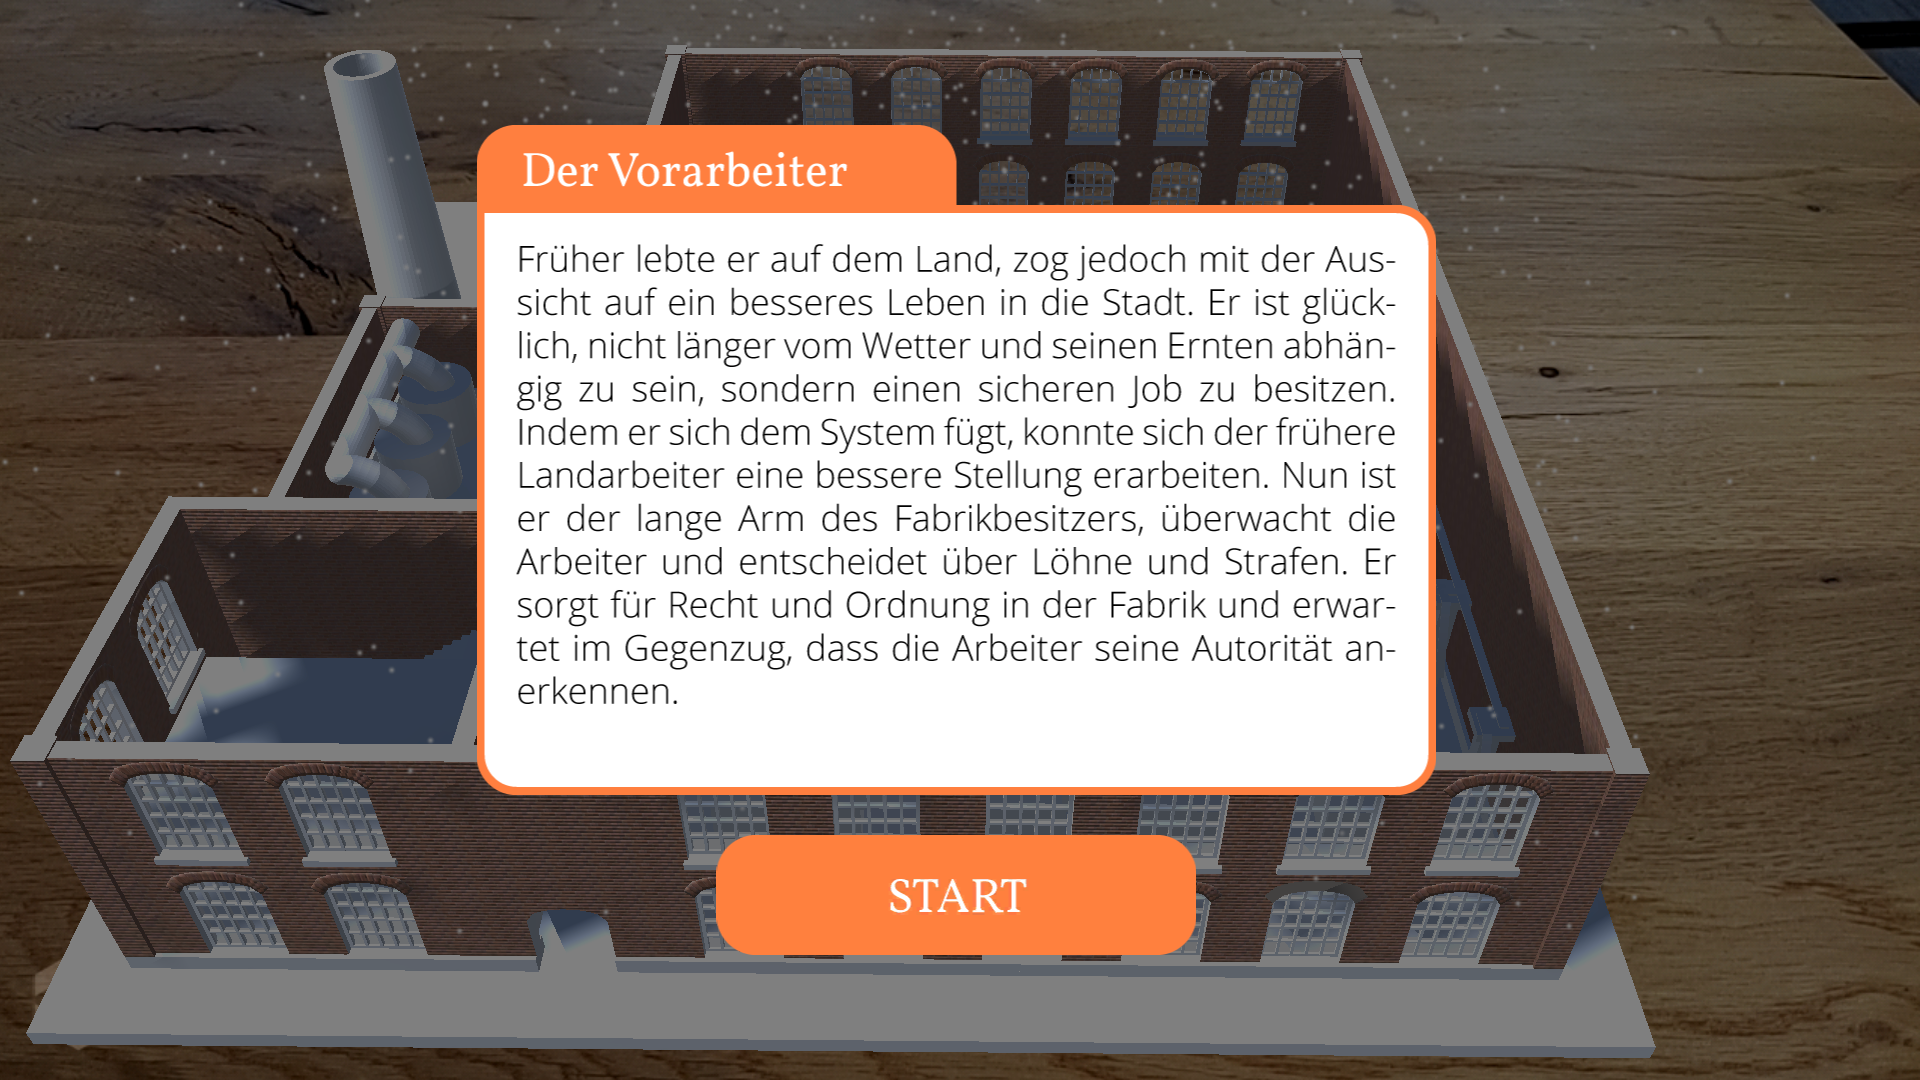 Screenshot of yARn that shows a 3D rendered factory projected on a wooden table from the perspective of the foreman. In the foreground a short description of the role of the foreman and a 'start' button are displayed.